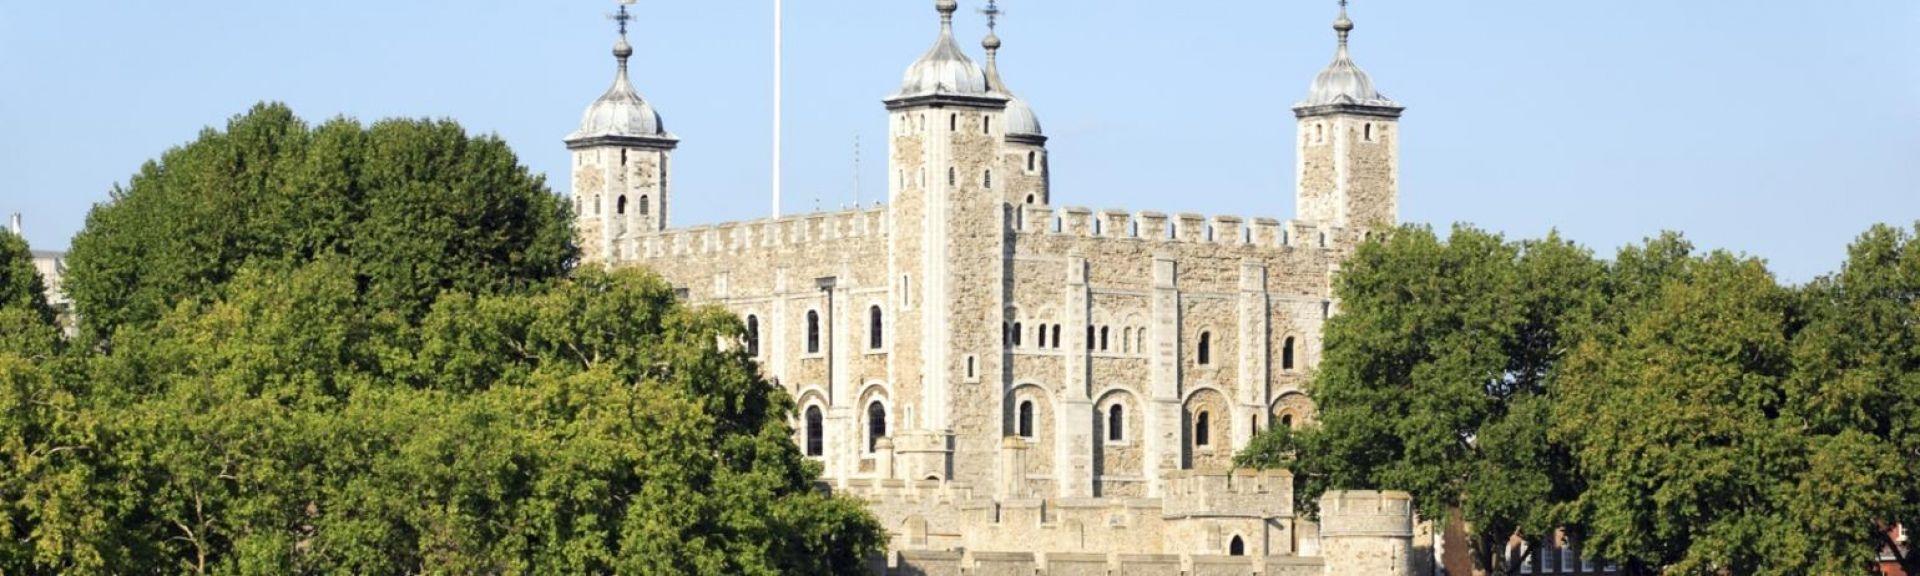 Free New Image. Tower of London wallpaper photo